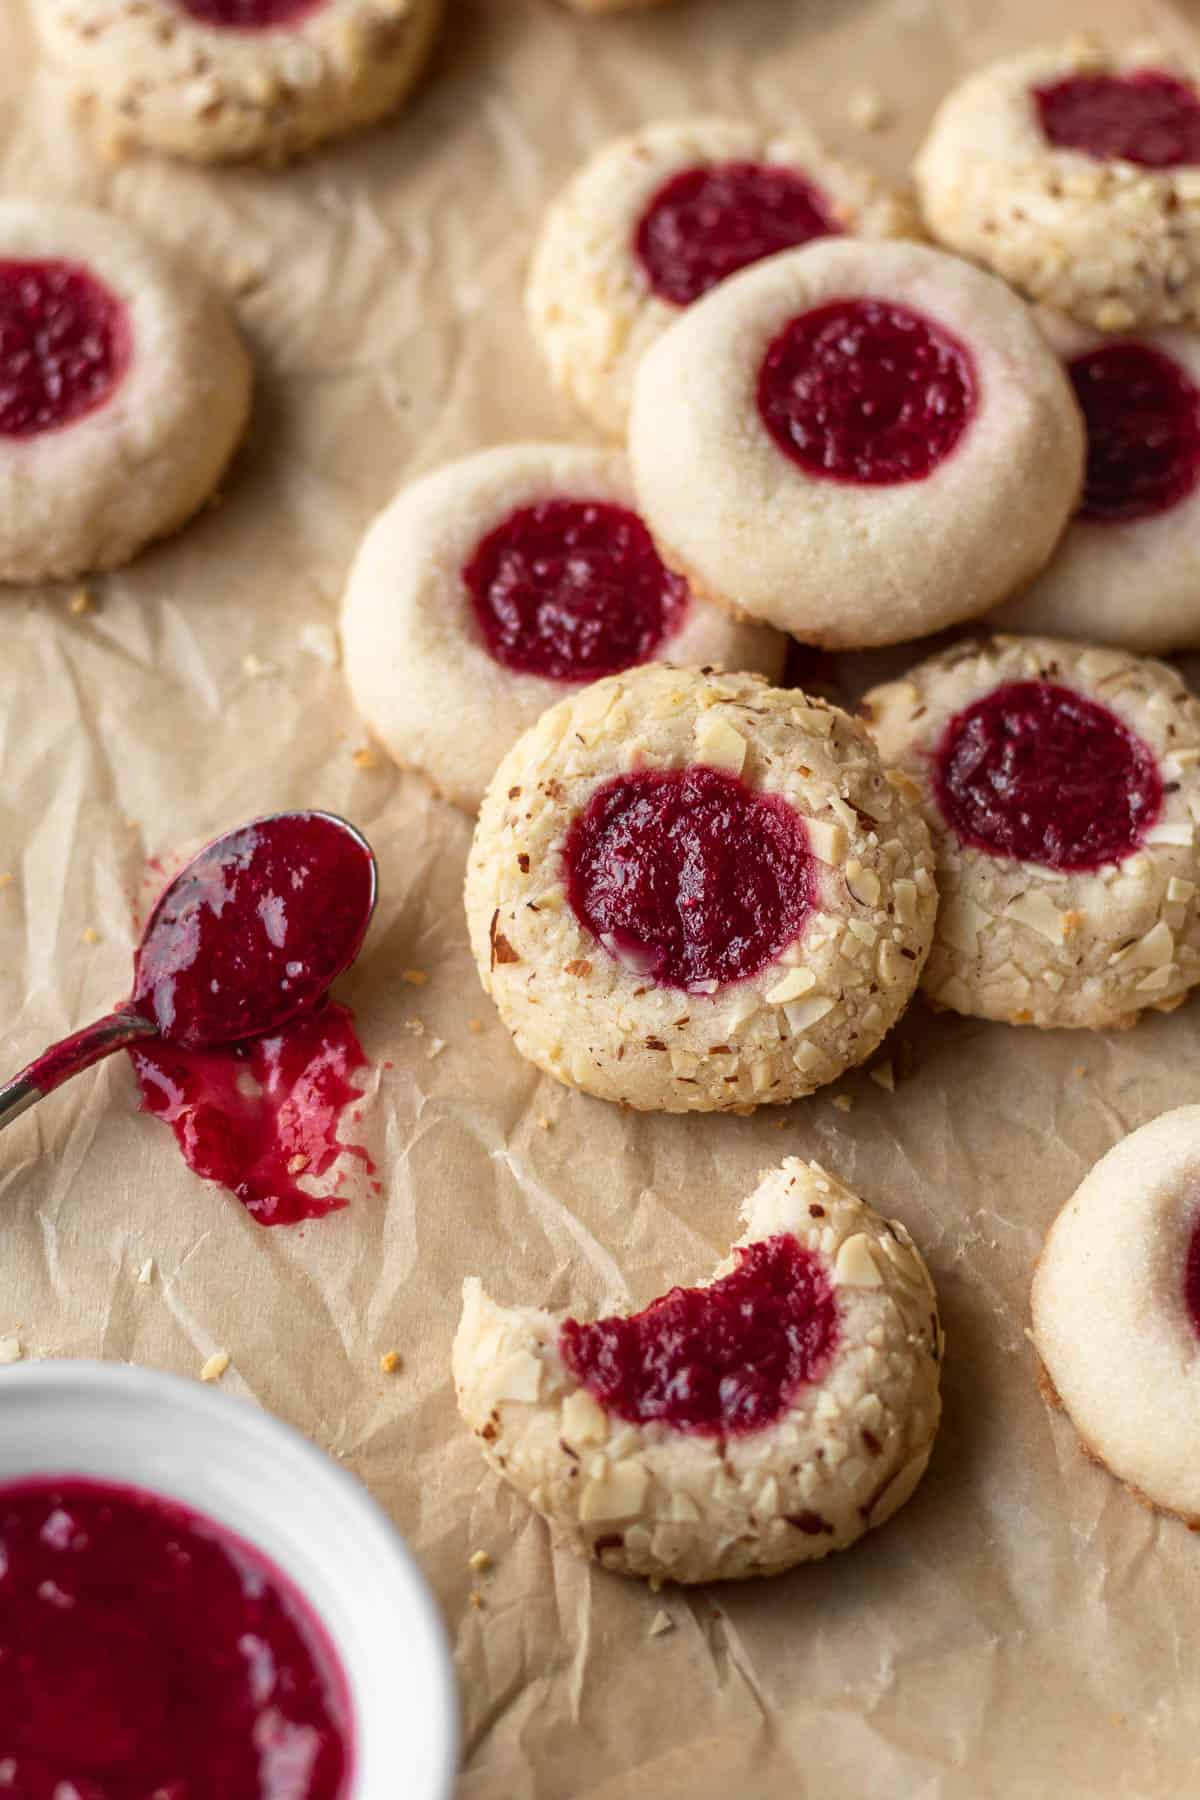 Gluten free thumbprint cookies next to a small spoon of jam on a brown parchment paper.